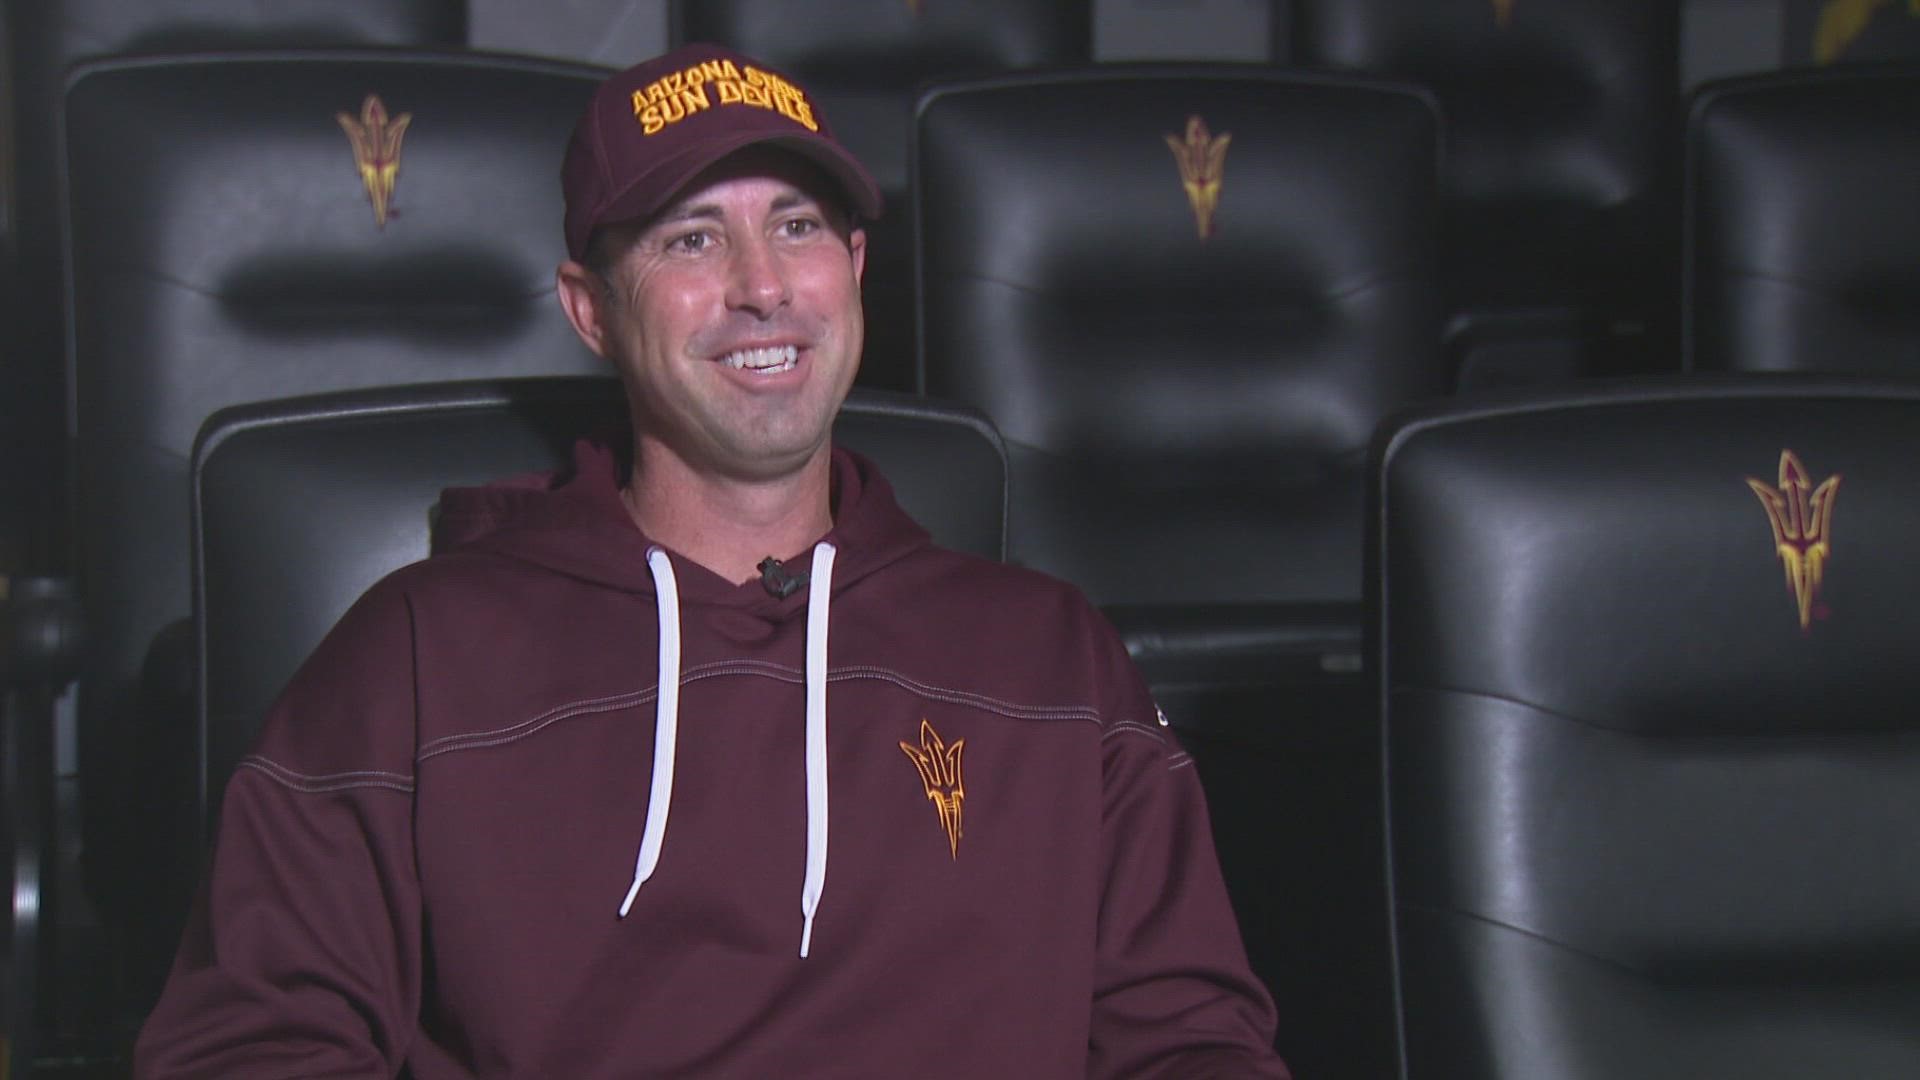 In an exclusive interview with 12Sports, Jason shared what it means for him to come home to coach tight ends for the Sun Devils at his alma mater.